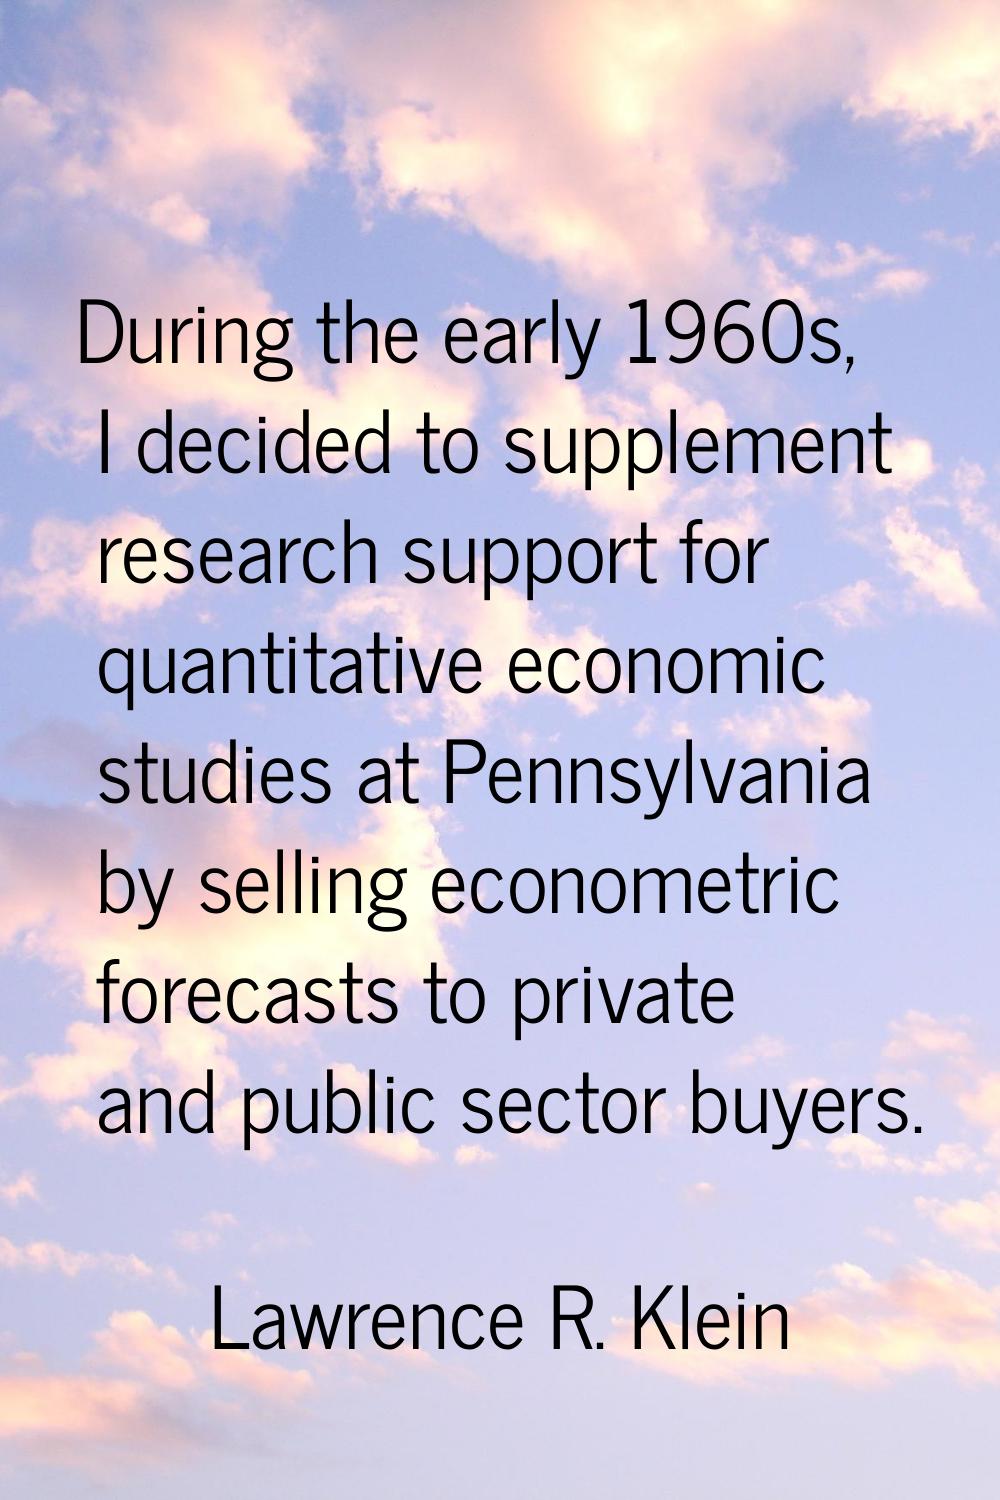 During the early 1960s, I decided to supplement research support for quantitative economic studies 